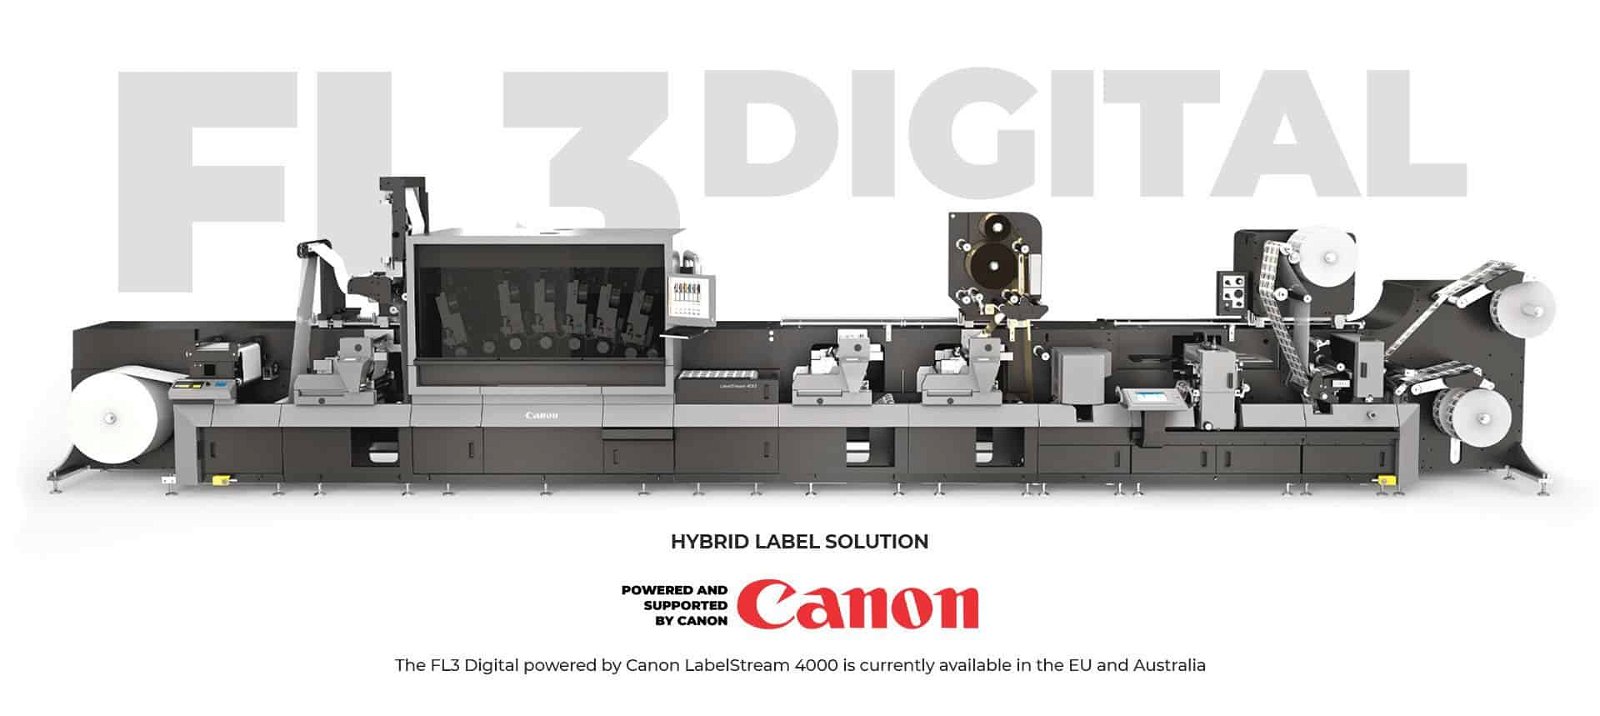 FL3 Digital - POWERED AND SUPPORTED BY CANON-Best Label Production Machine